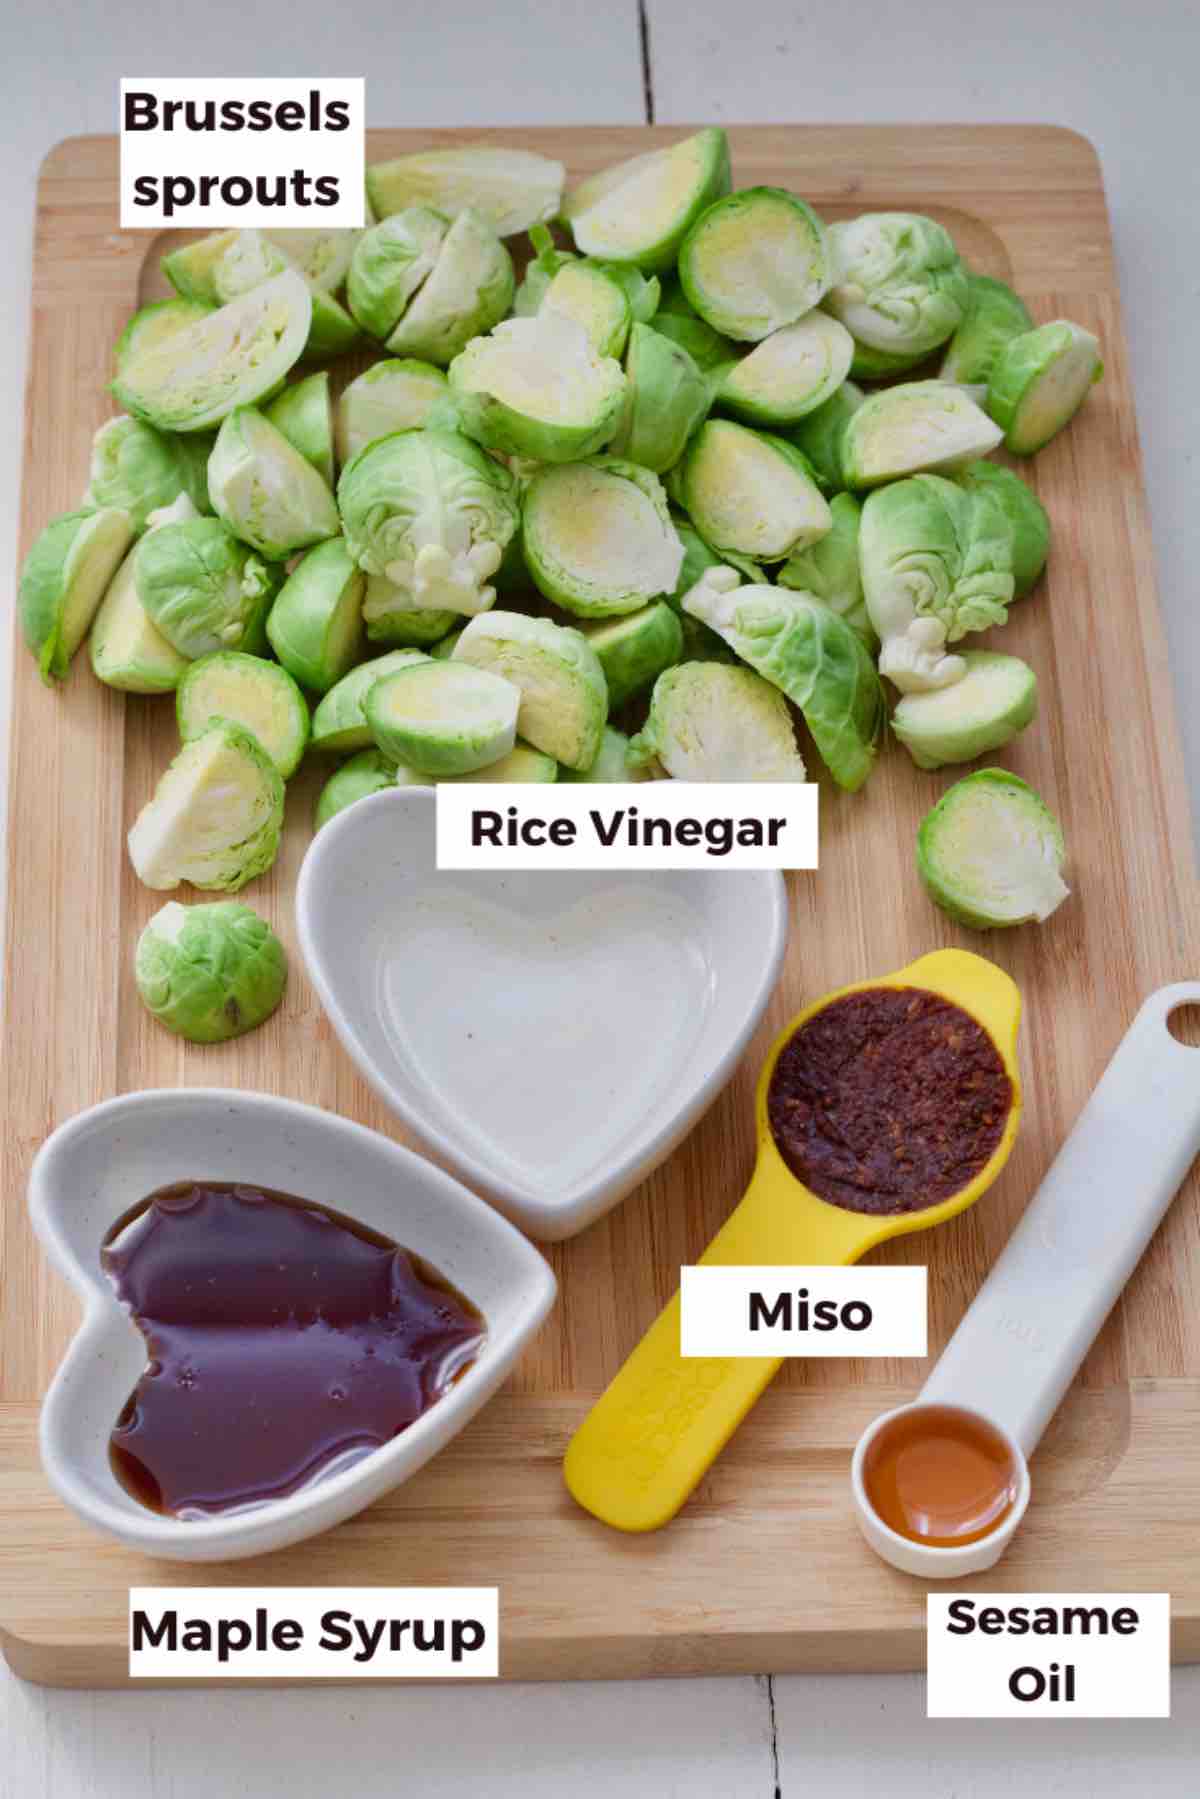 Ingredients for making Asian Brussels sprouts.